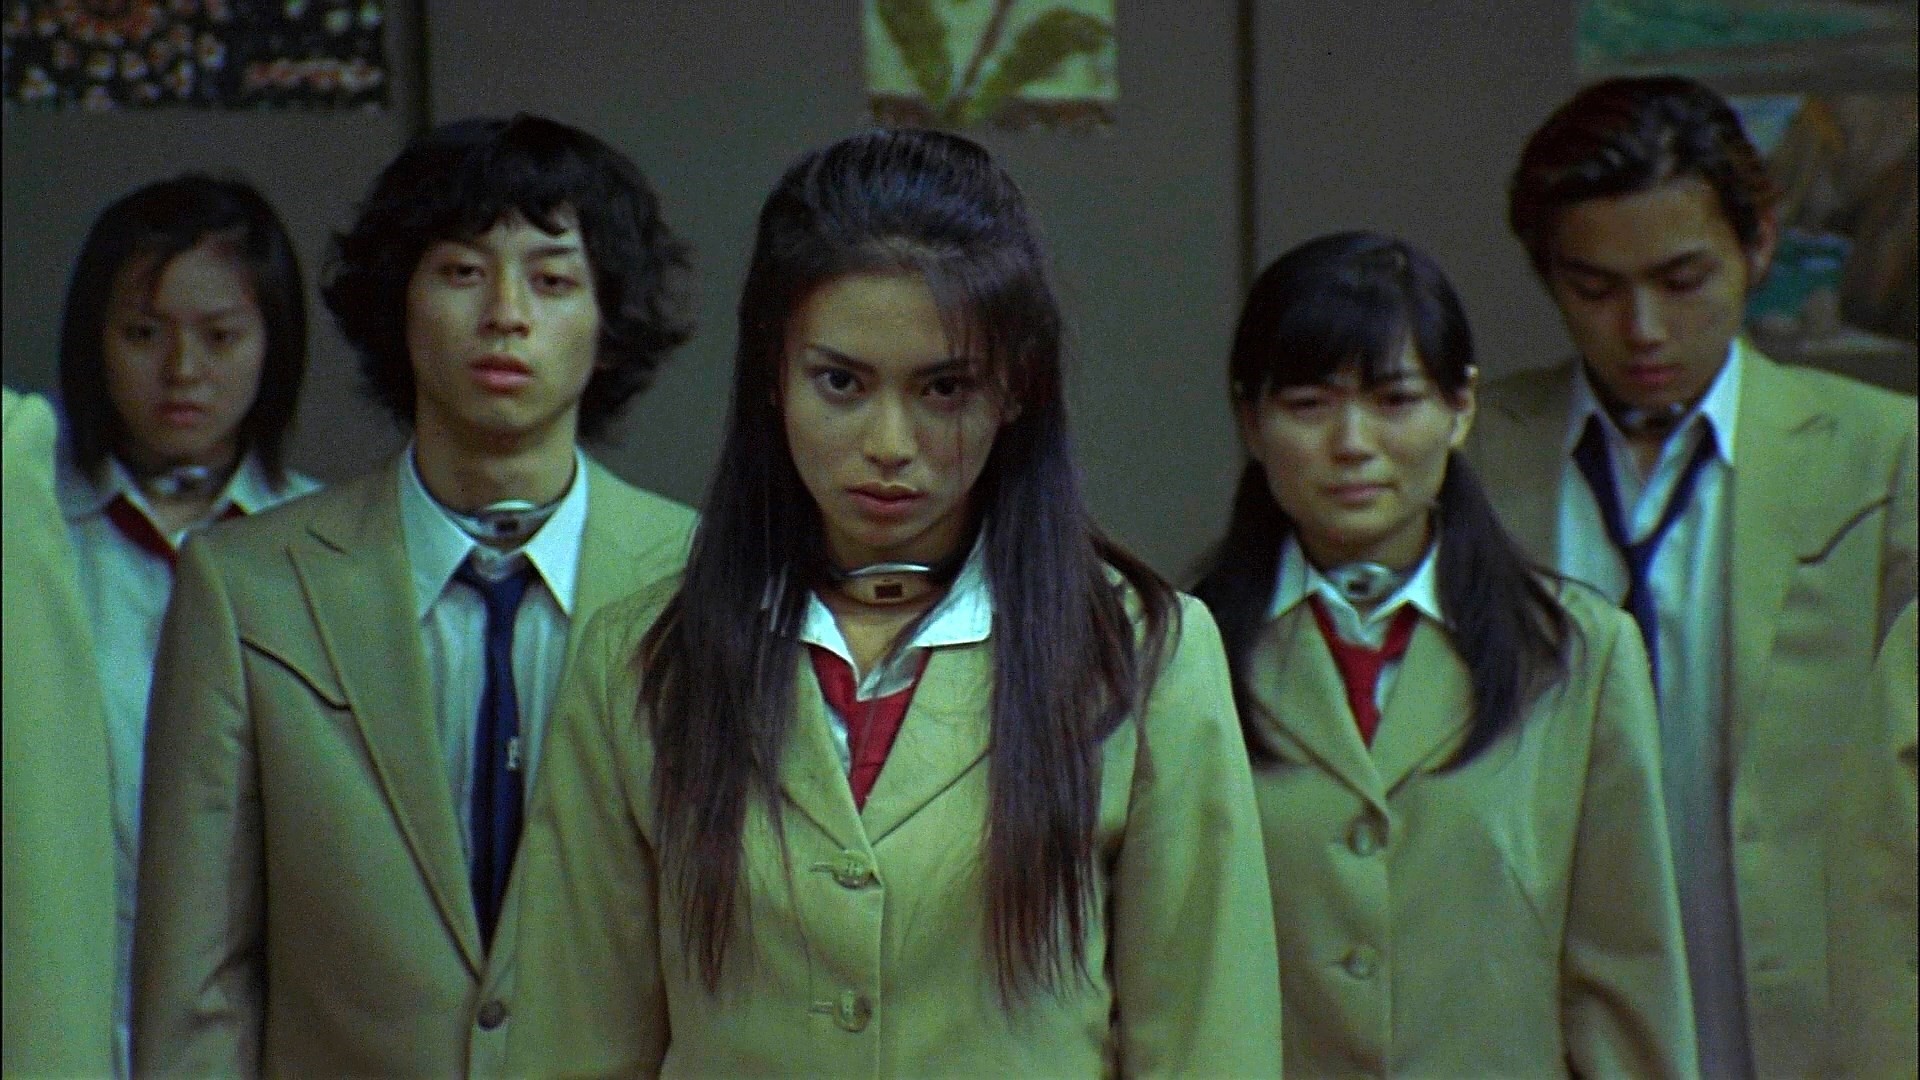 Japanese 18 Schoolgirl Hd - How Japan's 90s teen delinquency crisis inspired a wave of killer movies |  Dazed